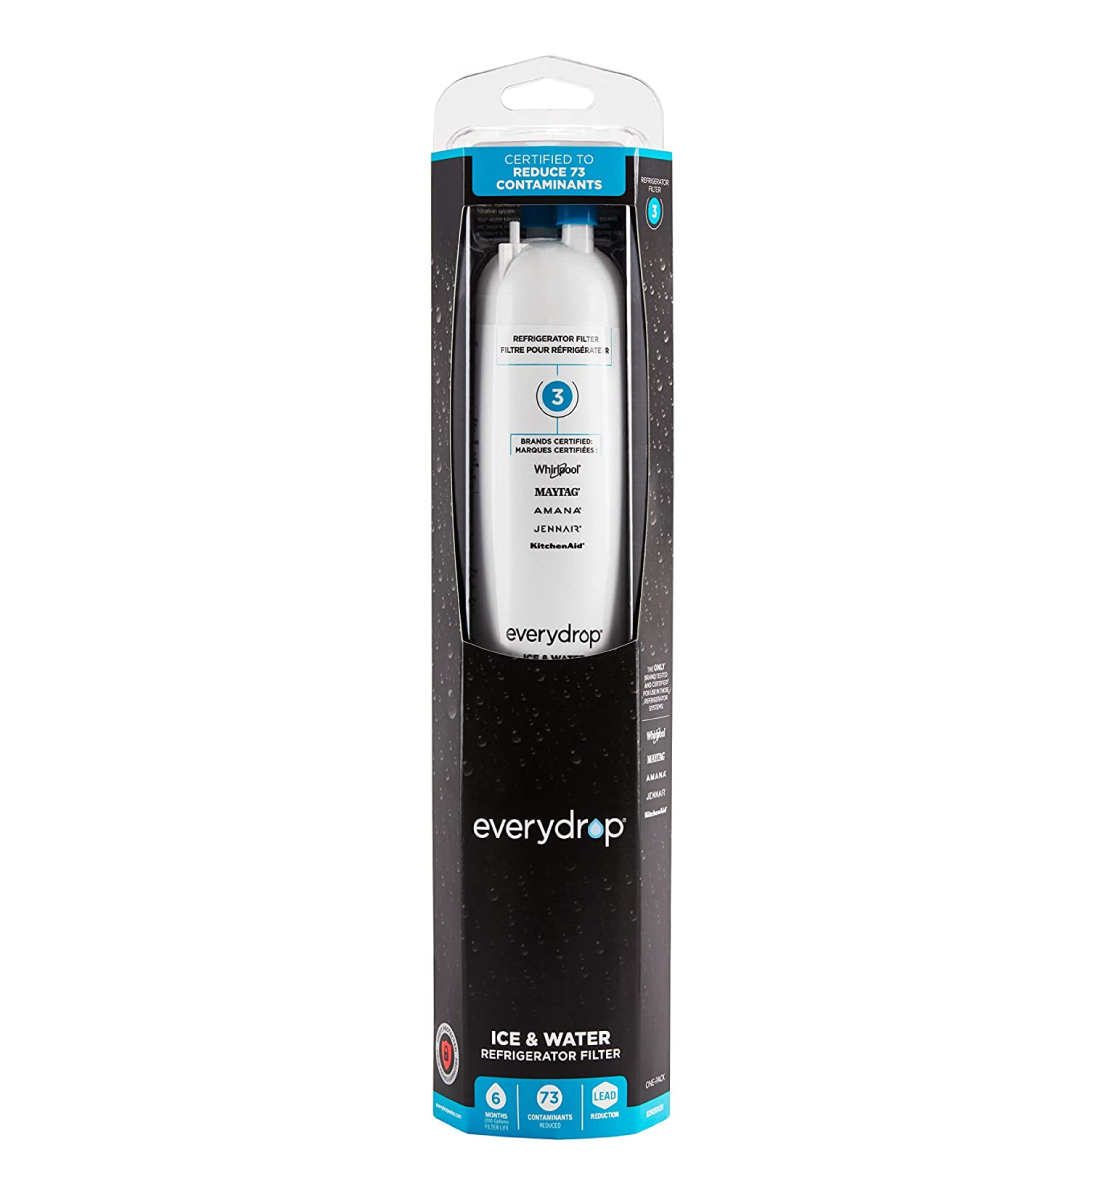 The EveryDrop Refrigerator Water Filter 3 (EDR3RXD1) by Whirlpool is a top-performing filter that removes impurities from your refrigerator water. Enjoy fresh, clean water and ice with this high-quality filter